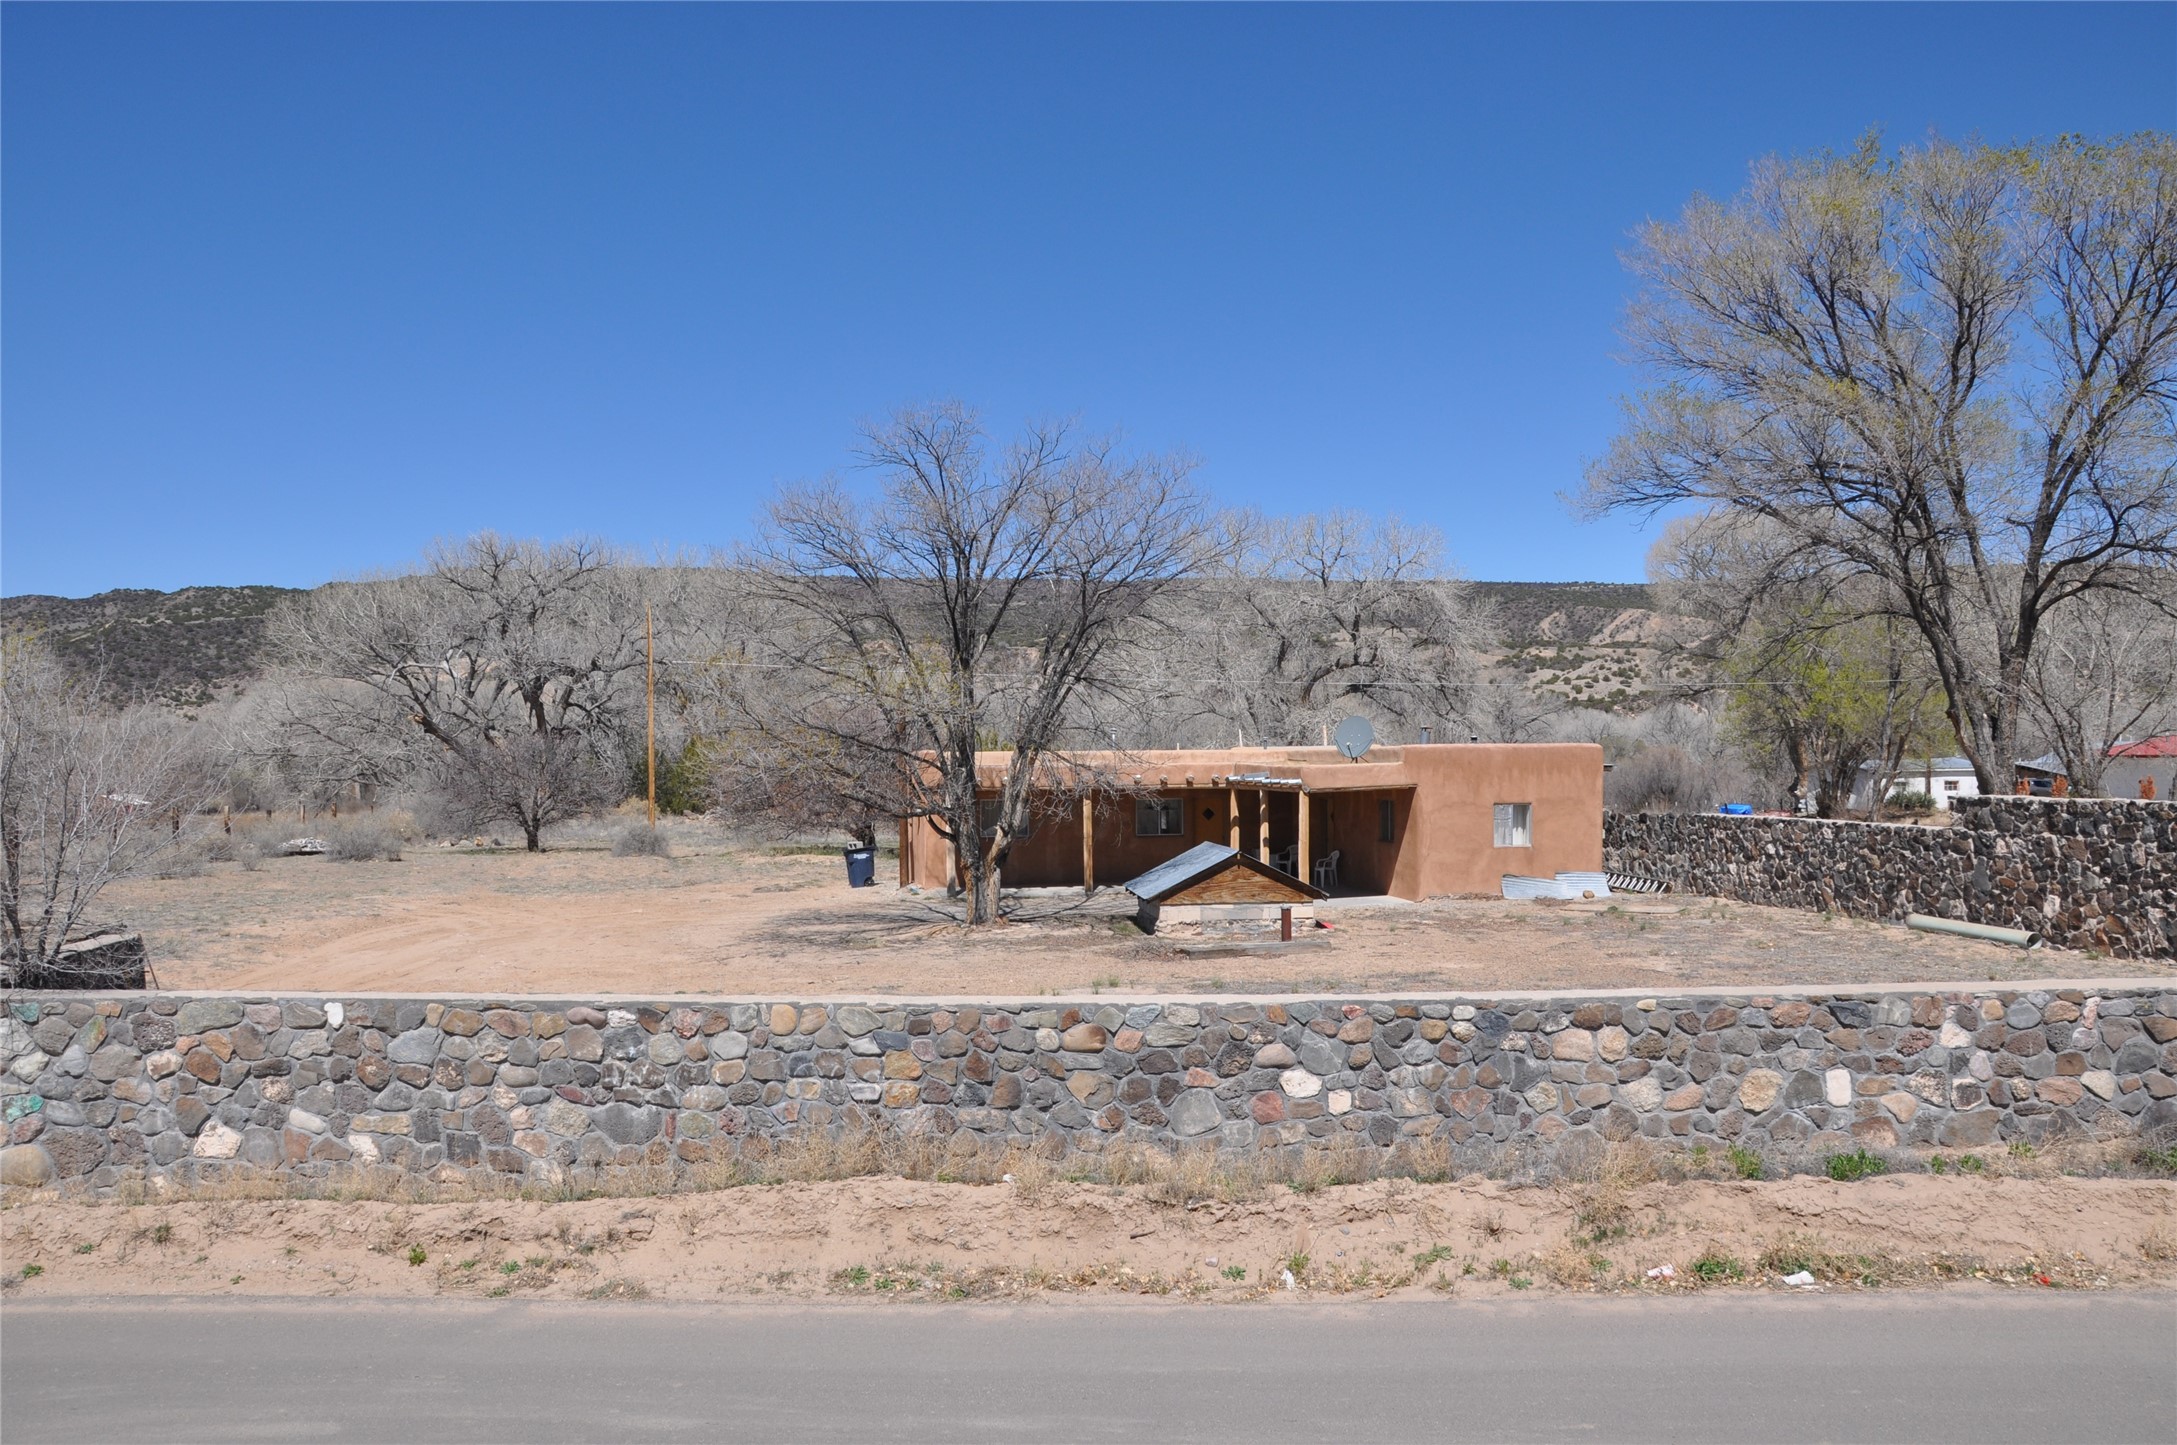 543 County Rd 41, Alcalde, New Mexico 87511, 2 Bedrooms Bedrooms, ,1 BathroomBathrooms,Residential,For Sale,543 County Rd 41,202401449